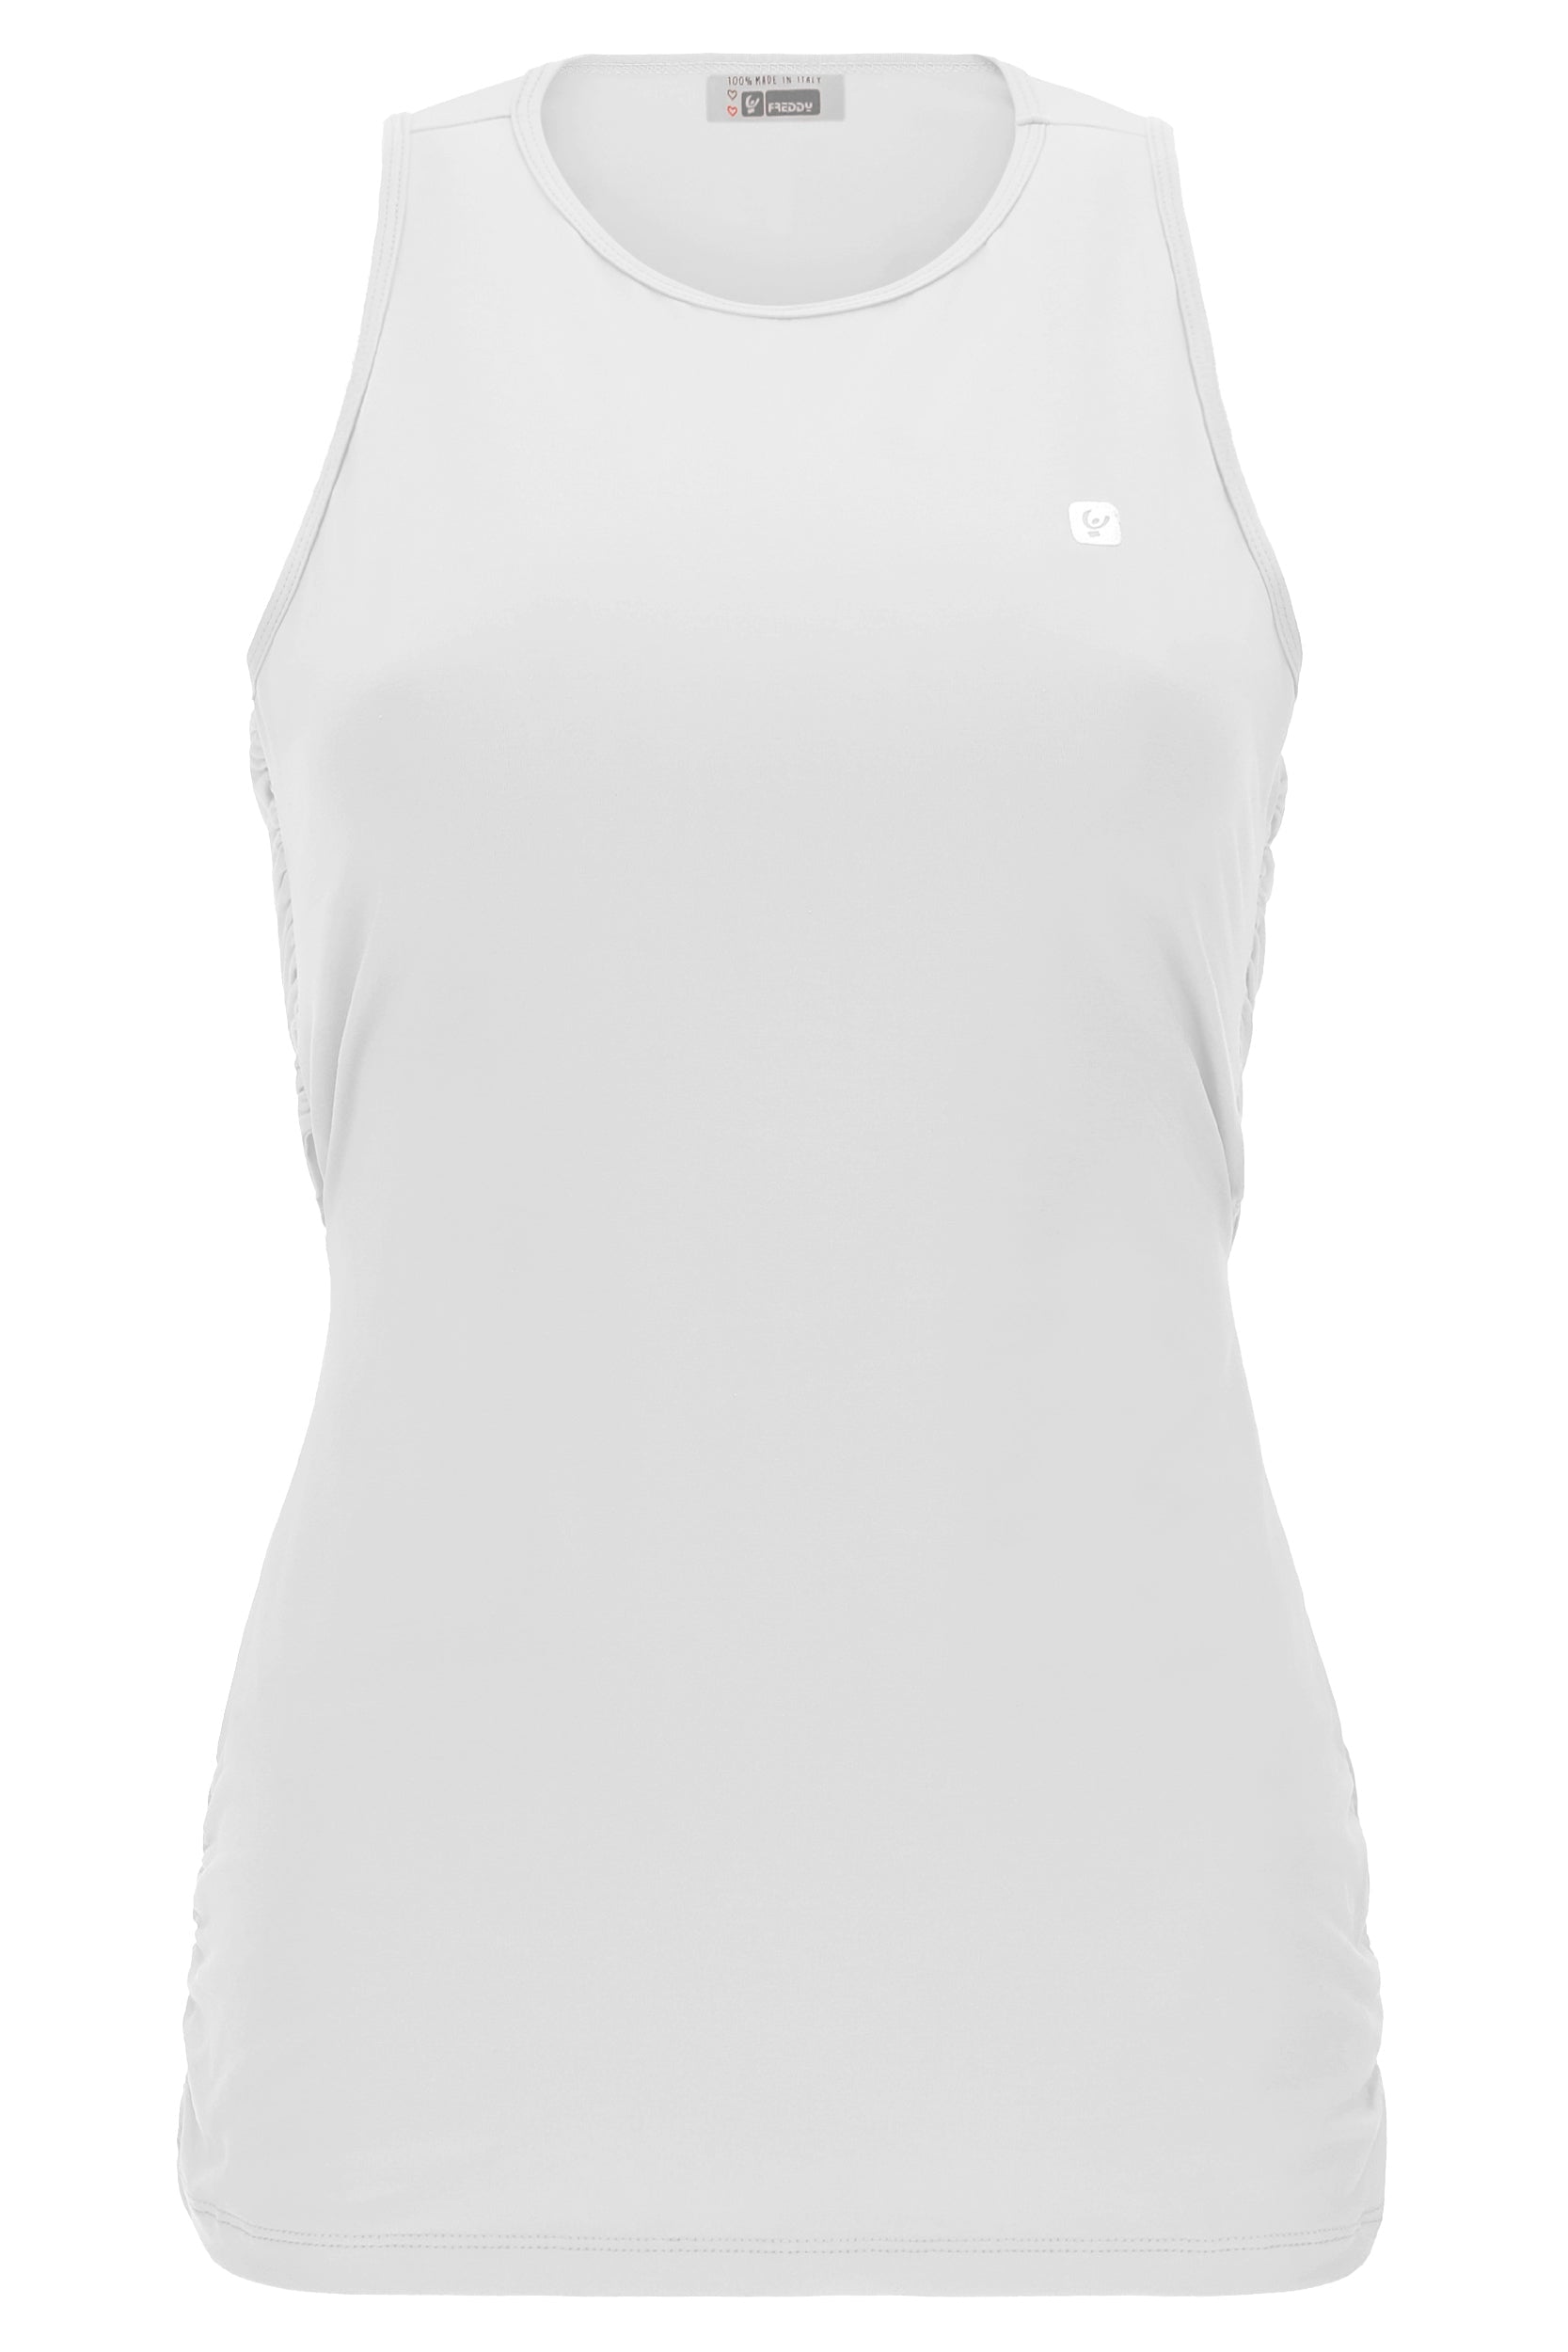 Yoga tank top with a criss cross back - White 3